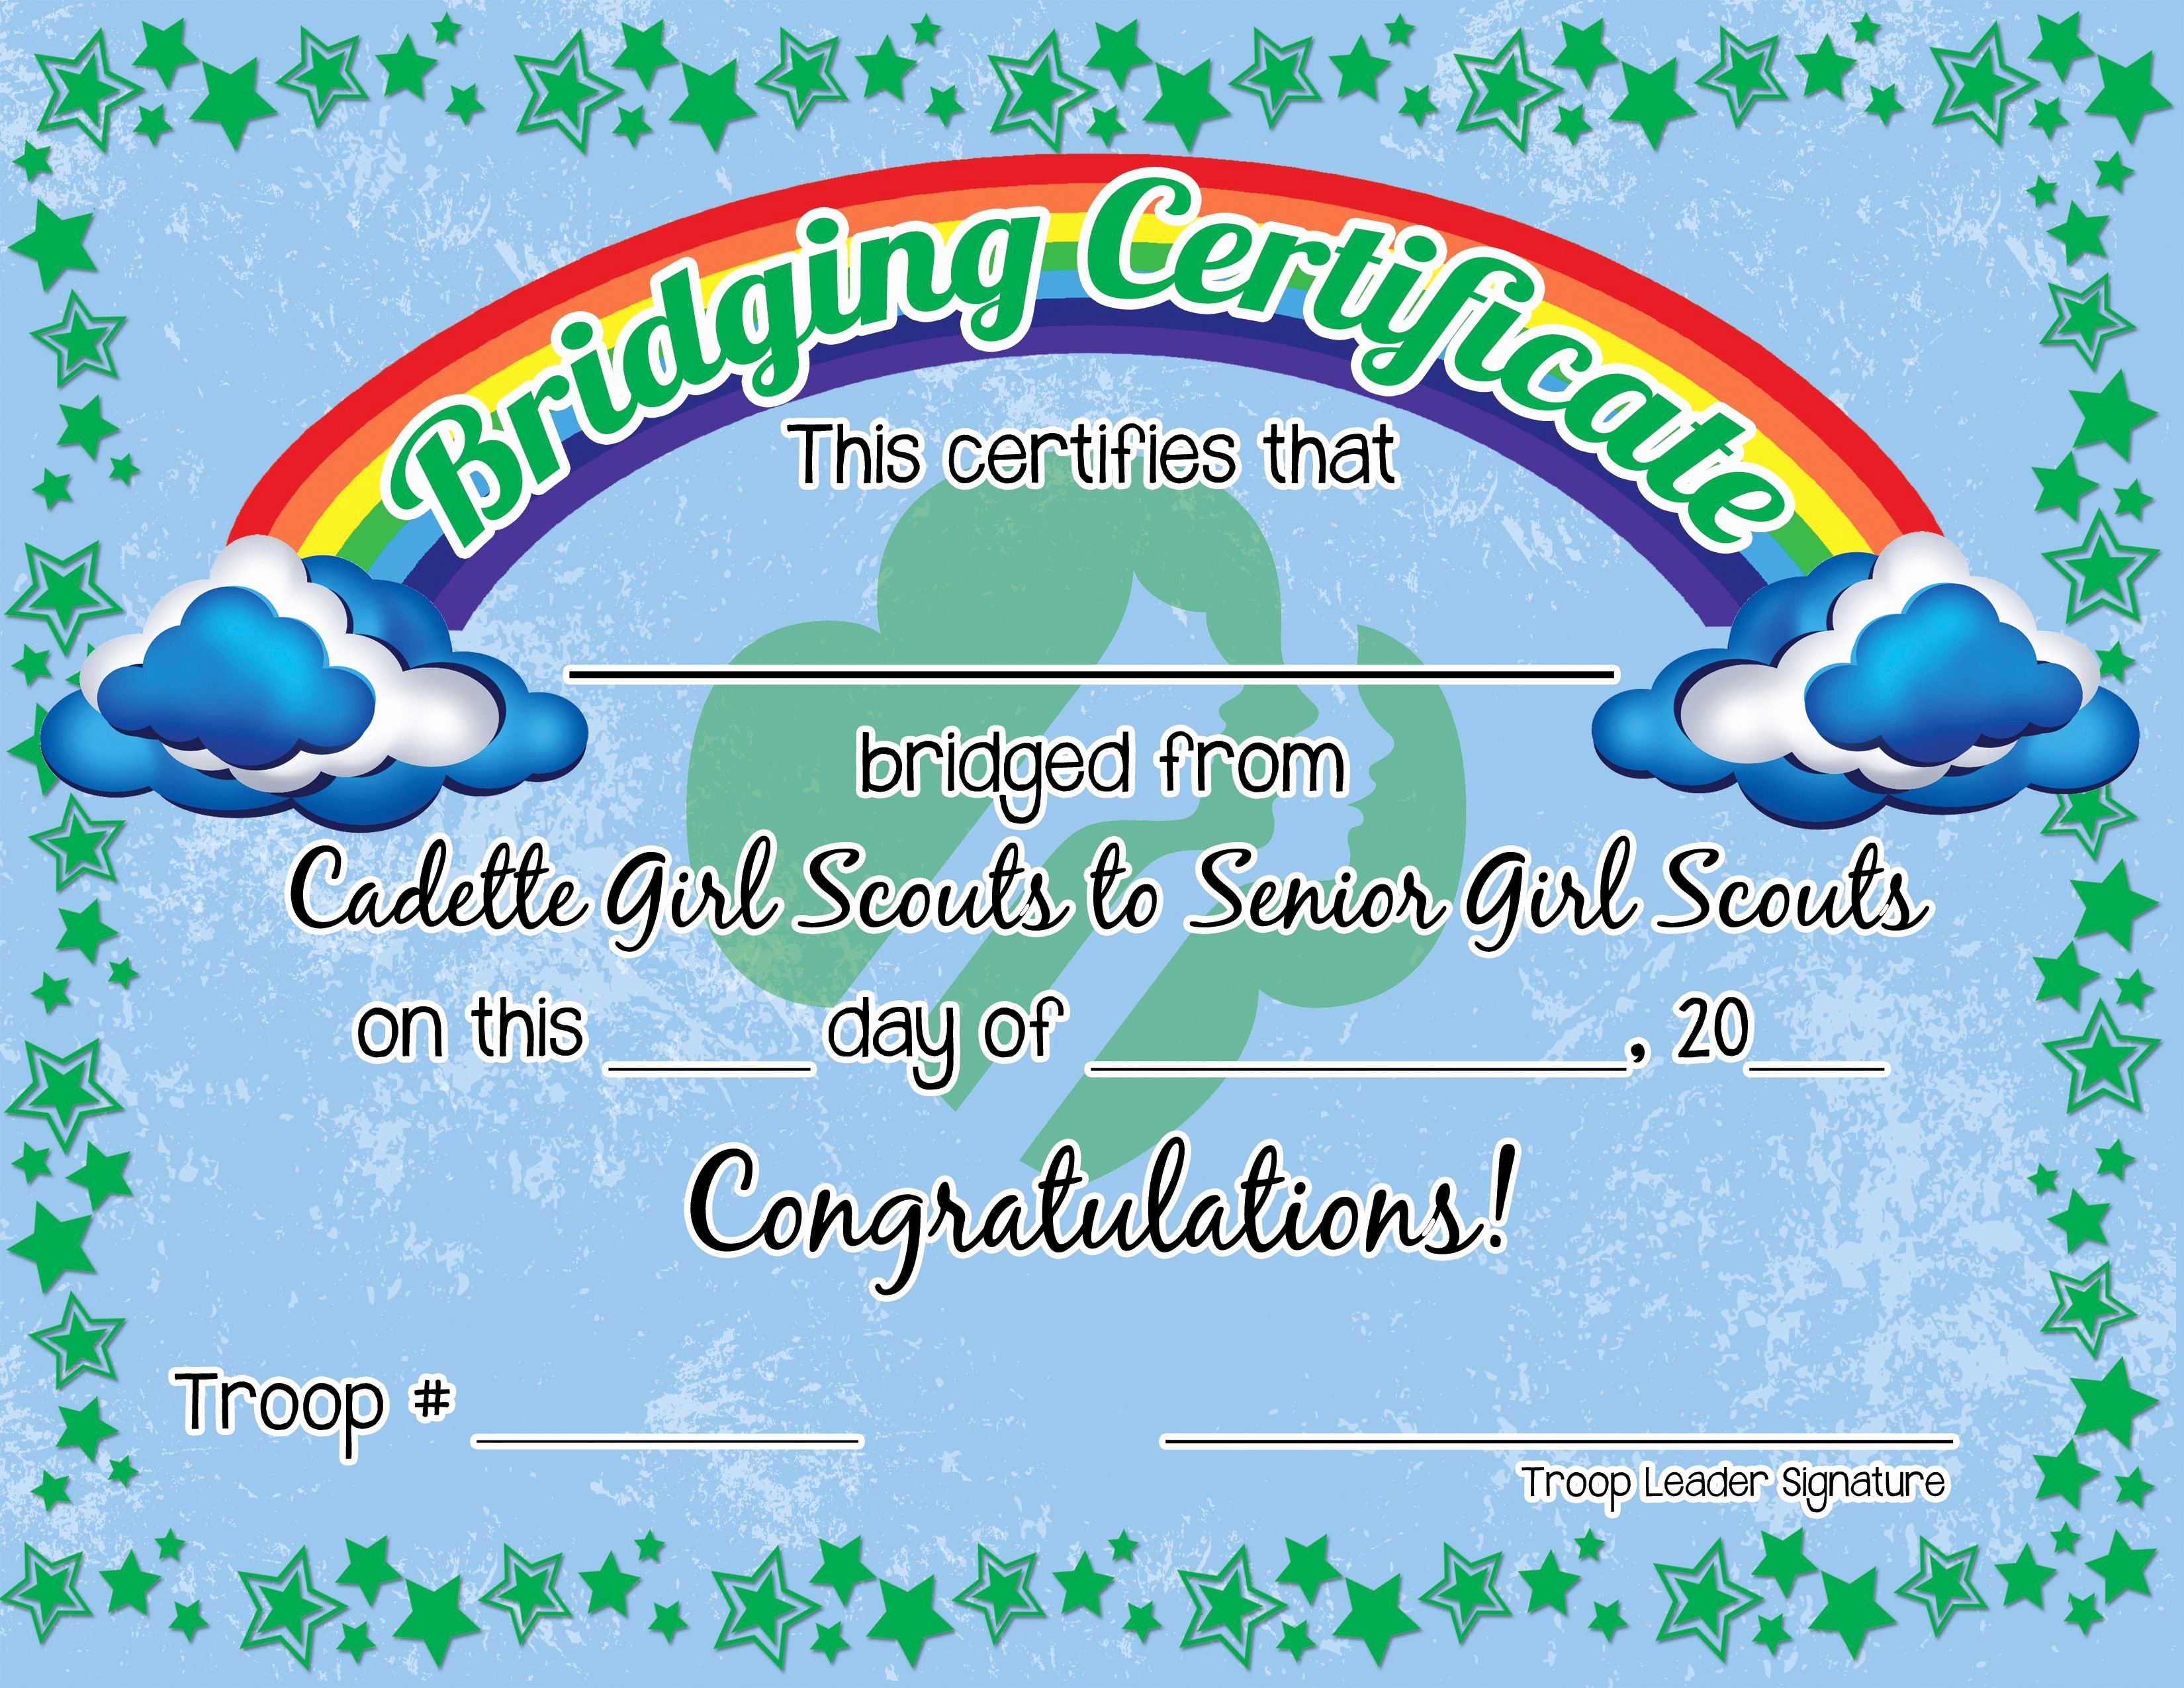 Girl Scout Bridging Certificates Lovely Certificate for Bridging From Cadette to Senior Girl Scouts Pinterest